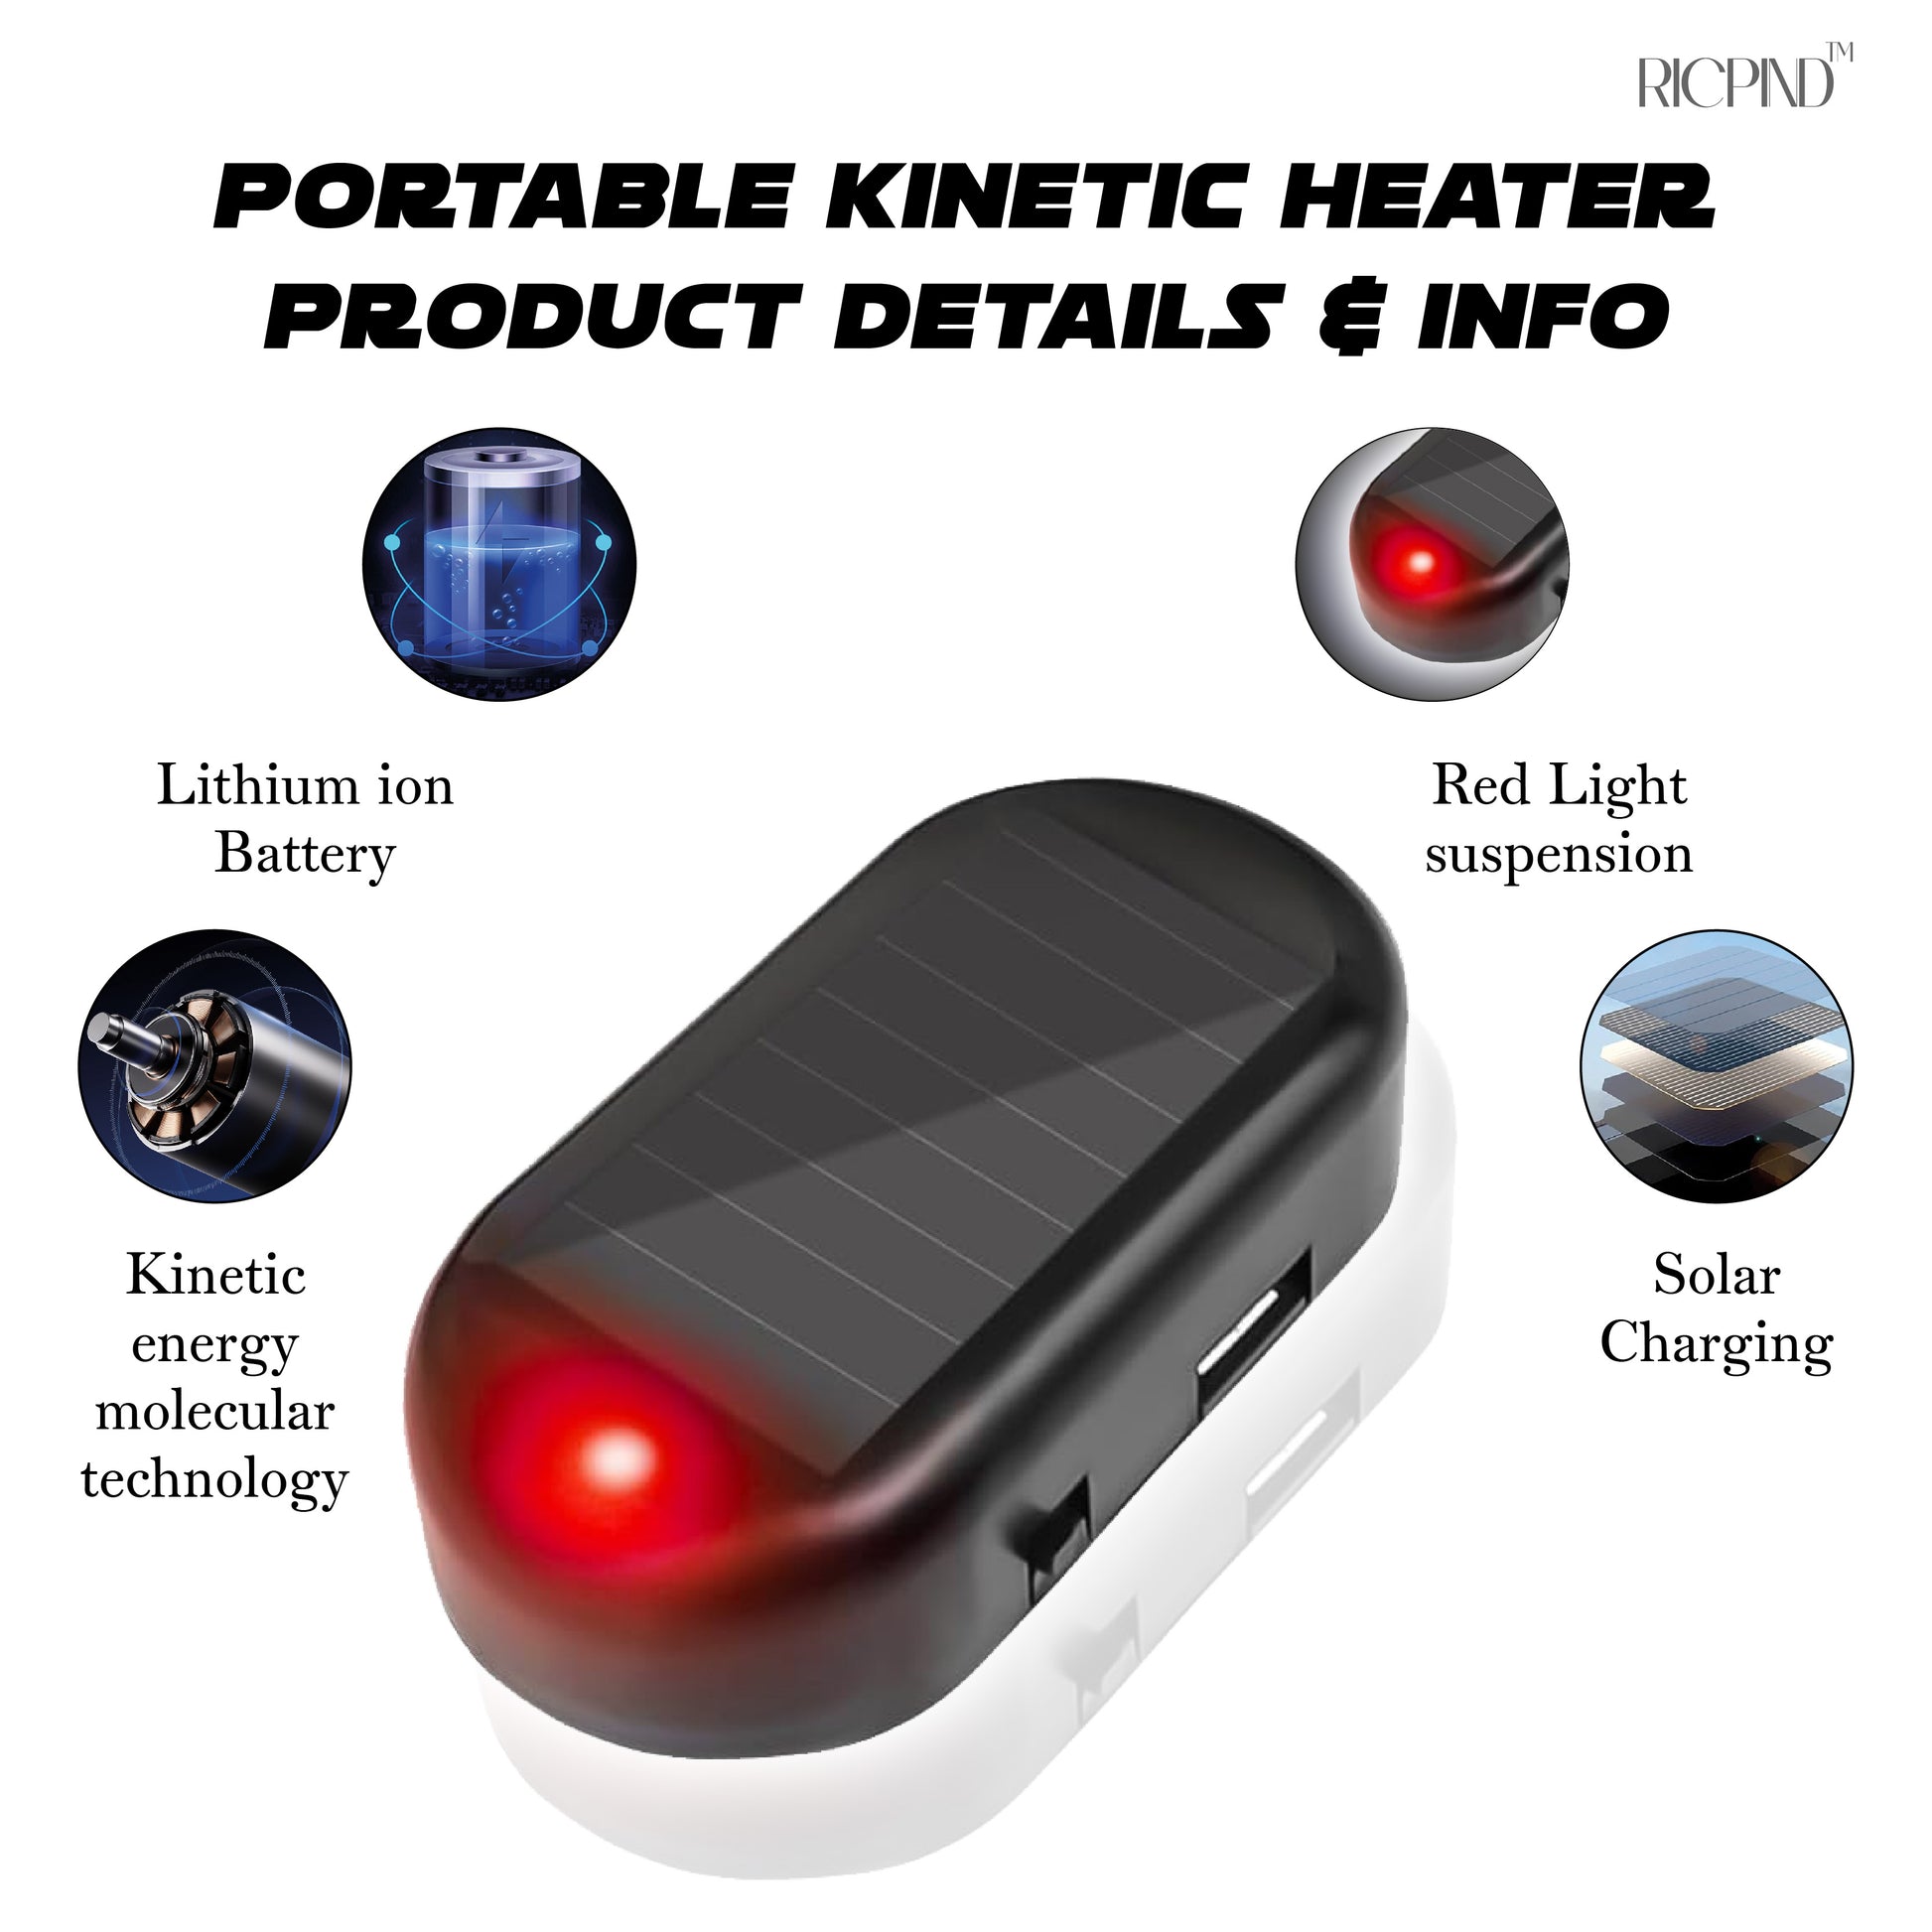 Portable Electromagnetic Molecular Heater with Kinetic Technology